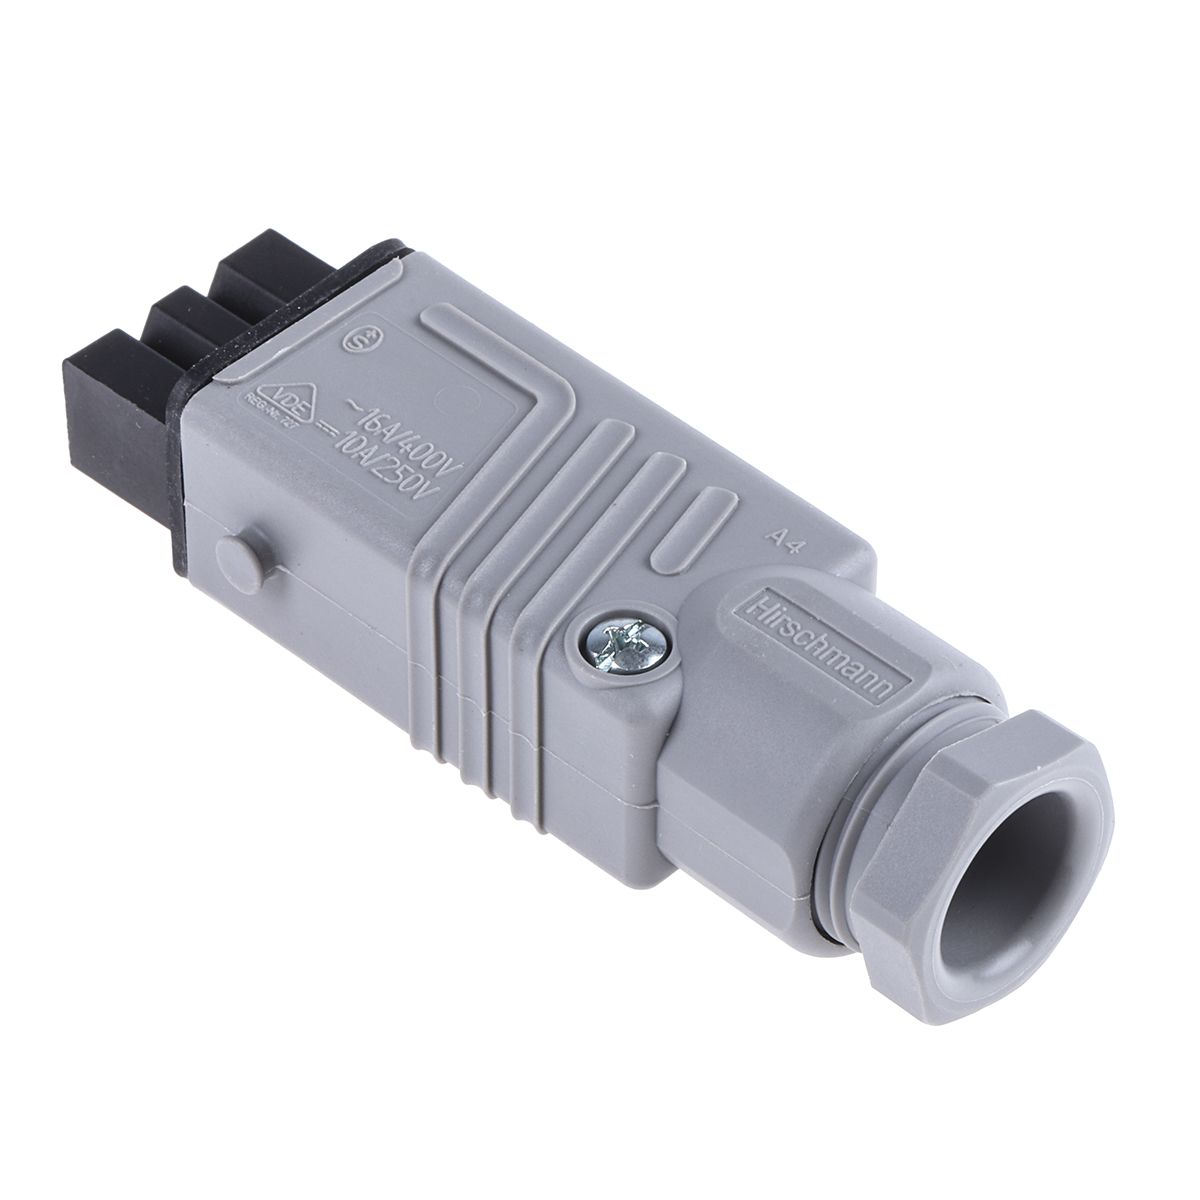 Hirschmann, ST IP54 Black, Grey Cable Mount 3P+E Heavy Duty Power Connector Socket, Rated At 16A, 250 V ac, 400 V ac